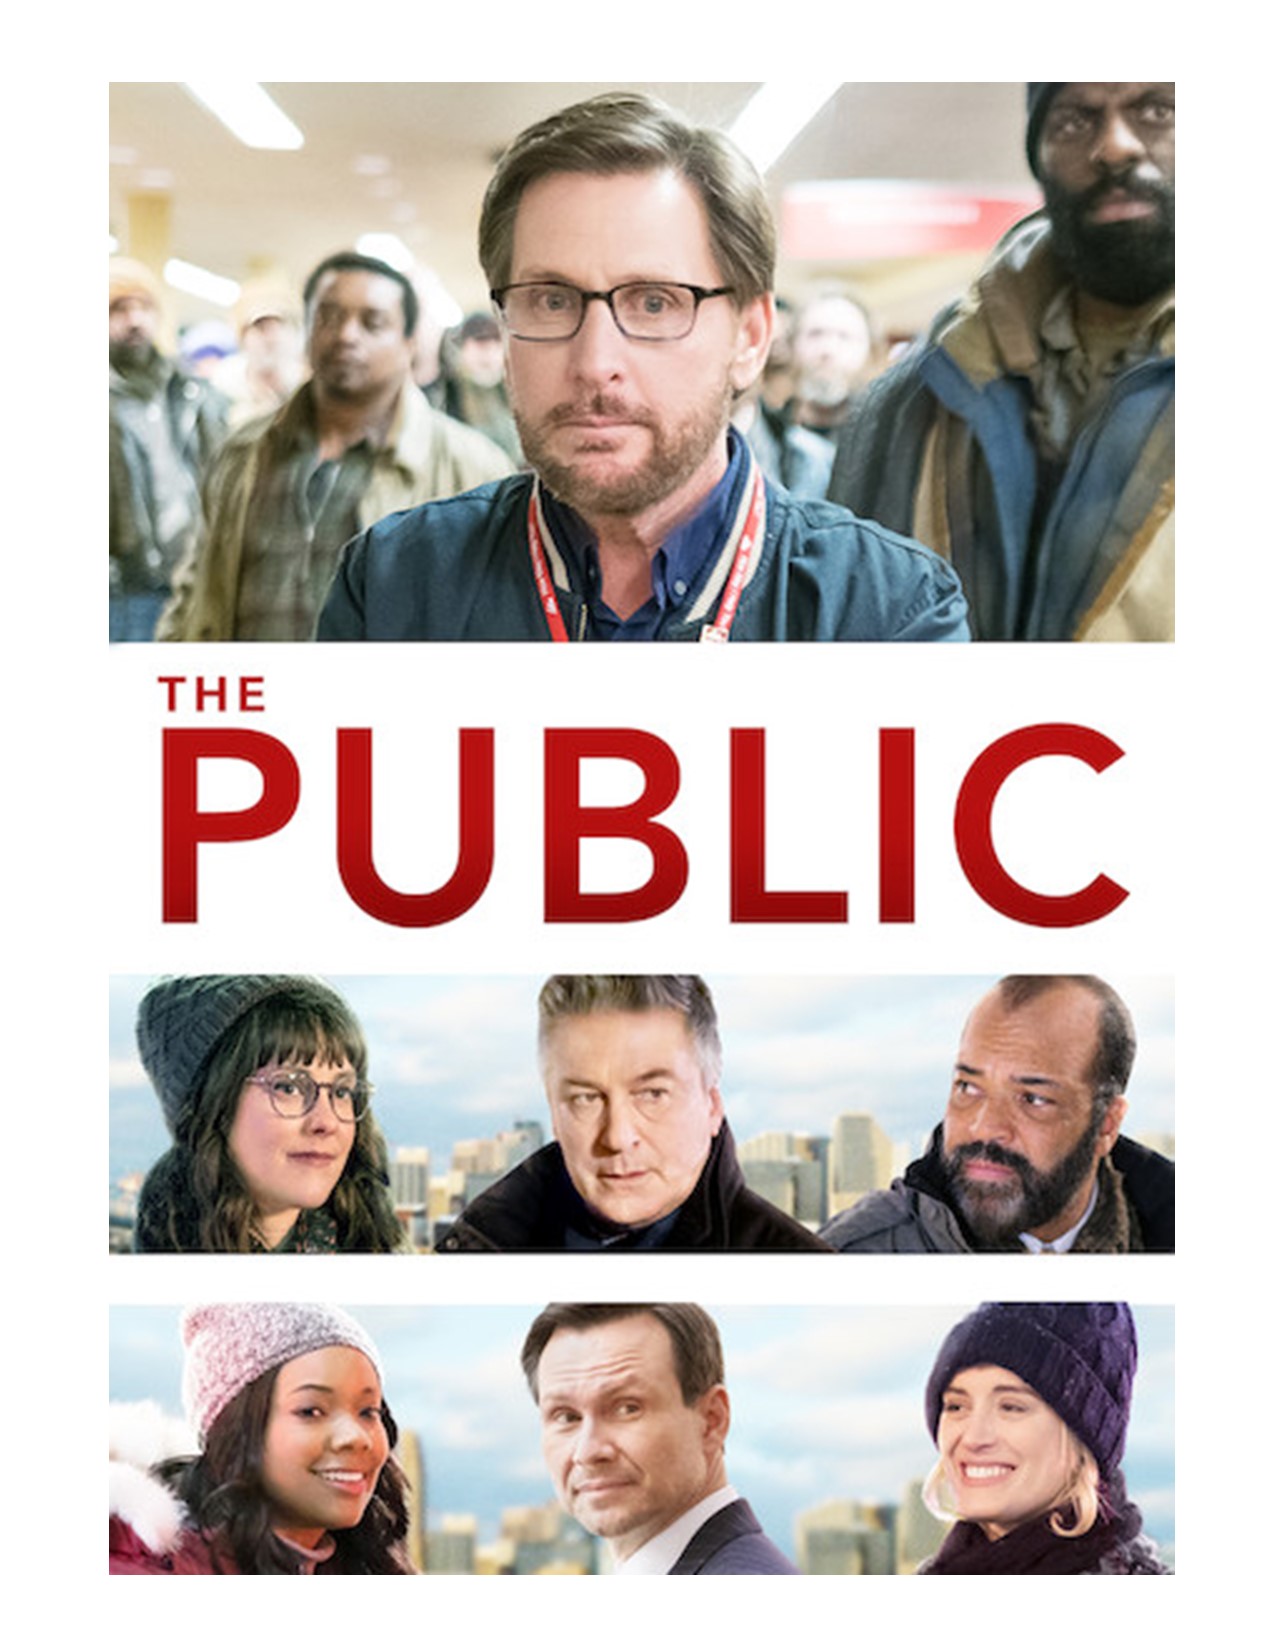 Movie poster with pictures of the characters and "The Public" written in read letters.